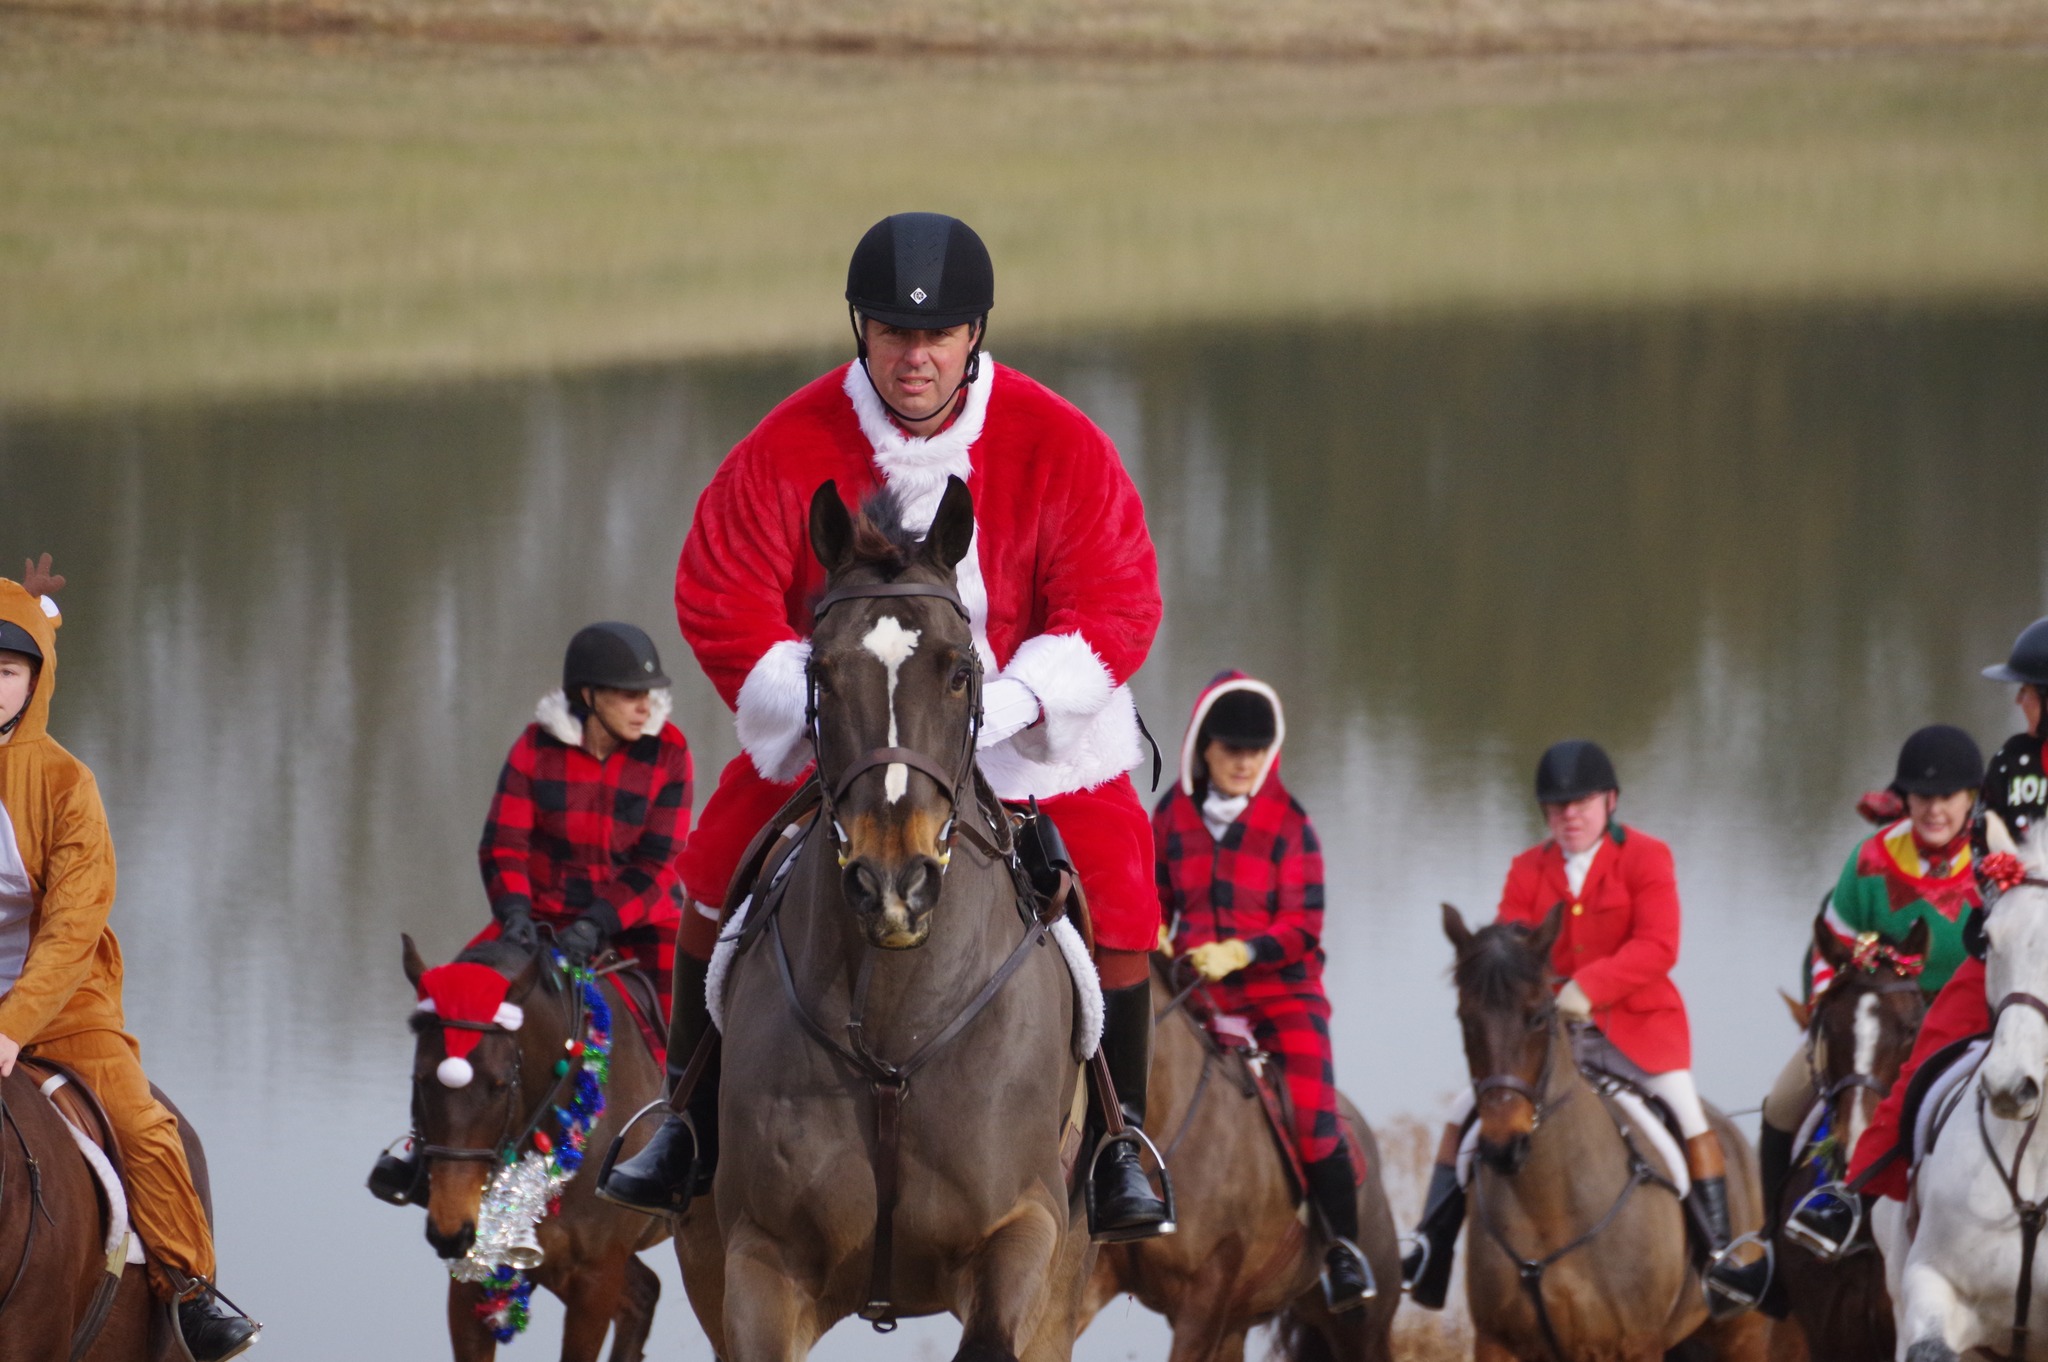 riders on horseback dressed in fun holiday colors and costumes